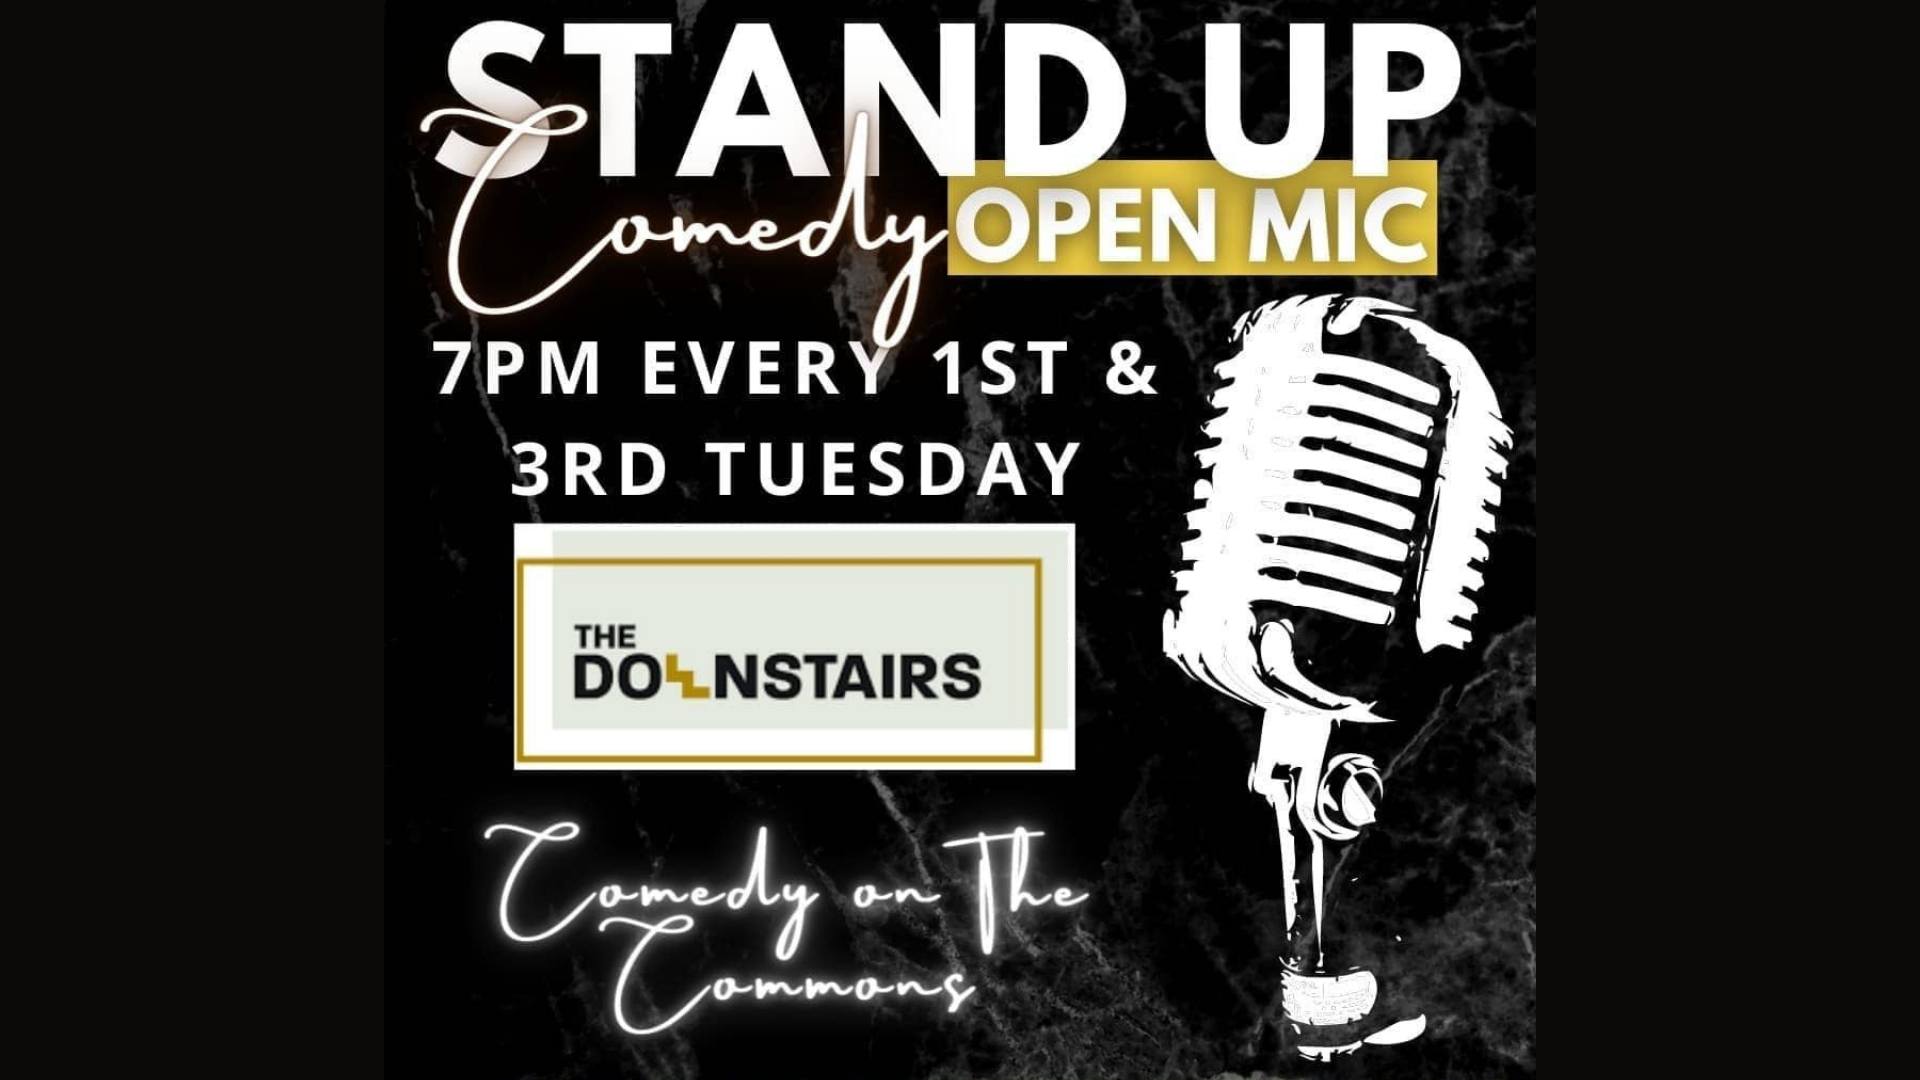 Poster: Stand Up Comedy Open Mic 7pm Every 1st & 3rd Tuesday @ The Downstairs